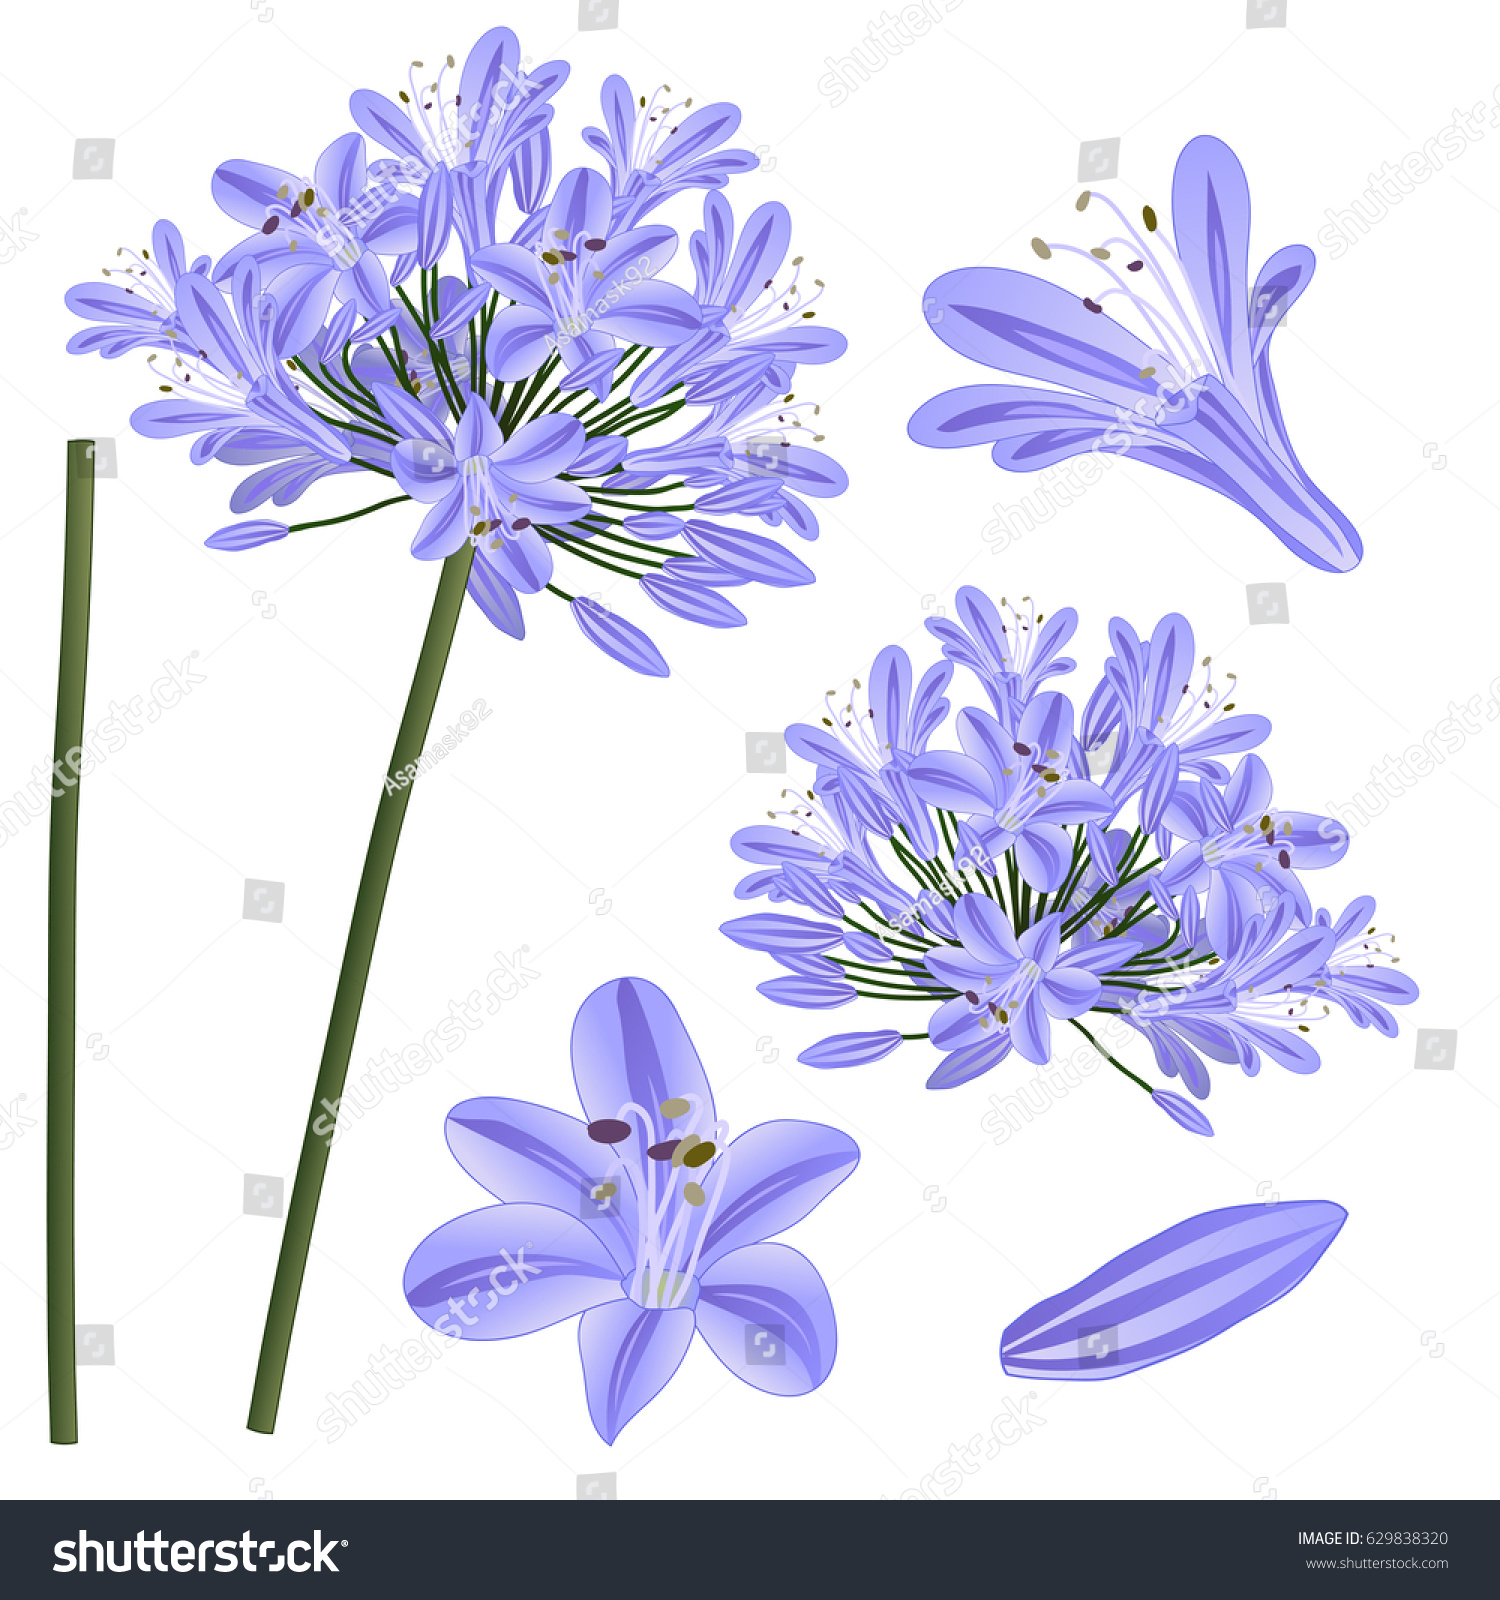 SVG of Blue Purple Agapanthus - Lily of the Nile, African Lily. Vector Illustration. isolated on White Background. svg